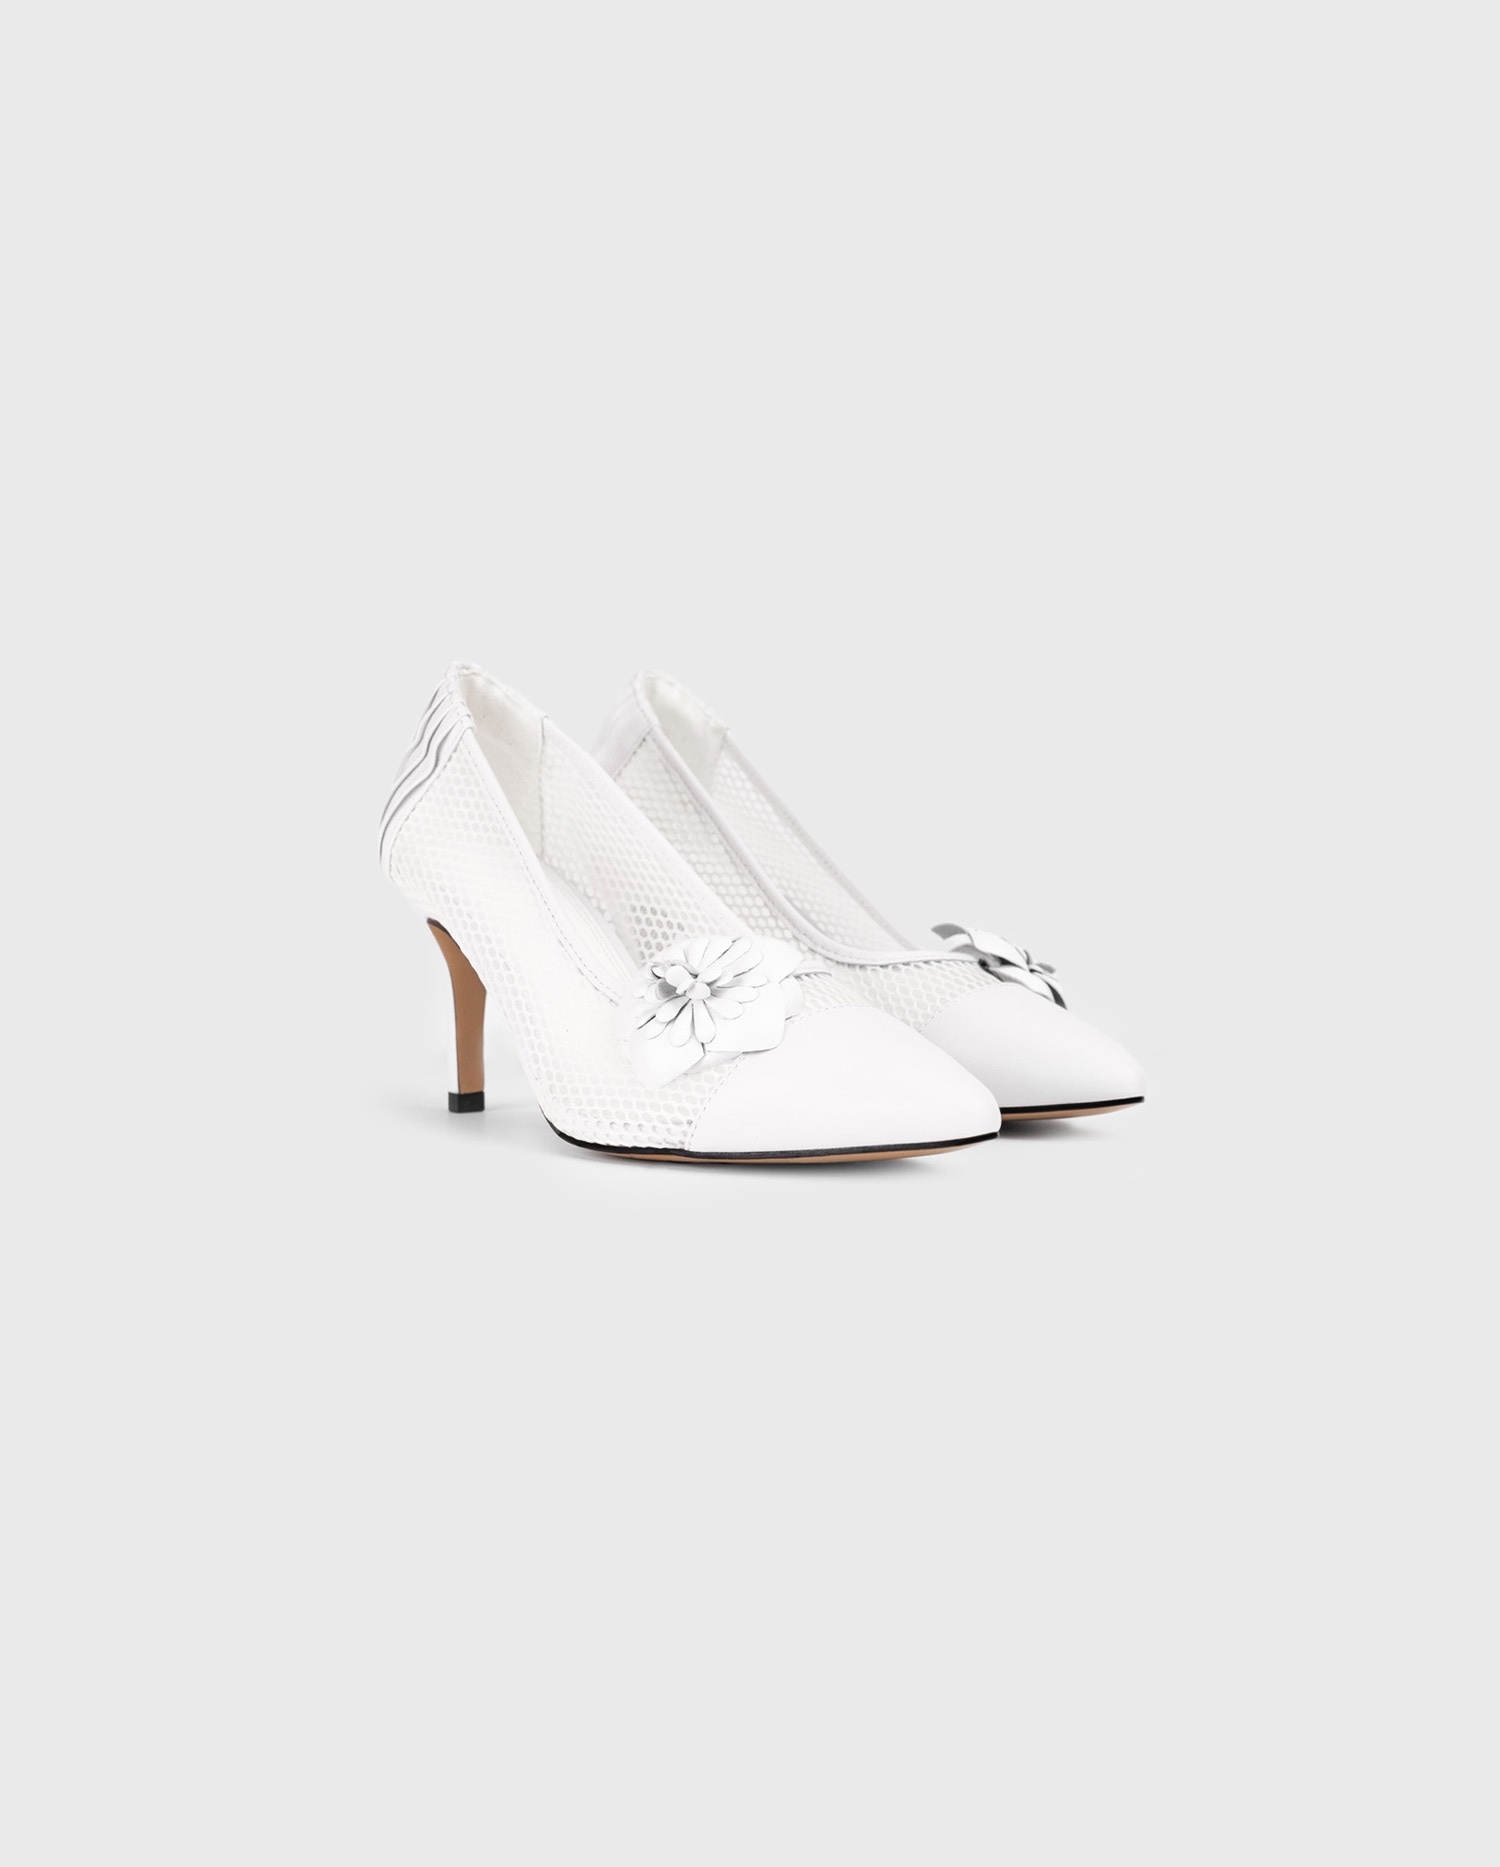 Discover the BASILIA White Leather Pump With Mesh Body and Removable Flowers from ANNE FONTAINE